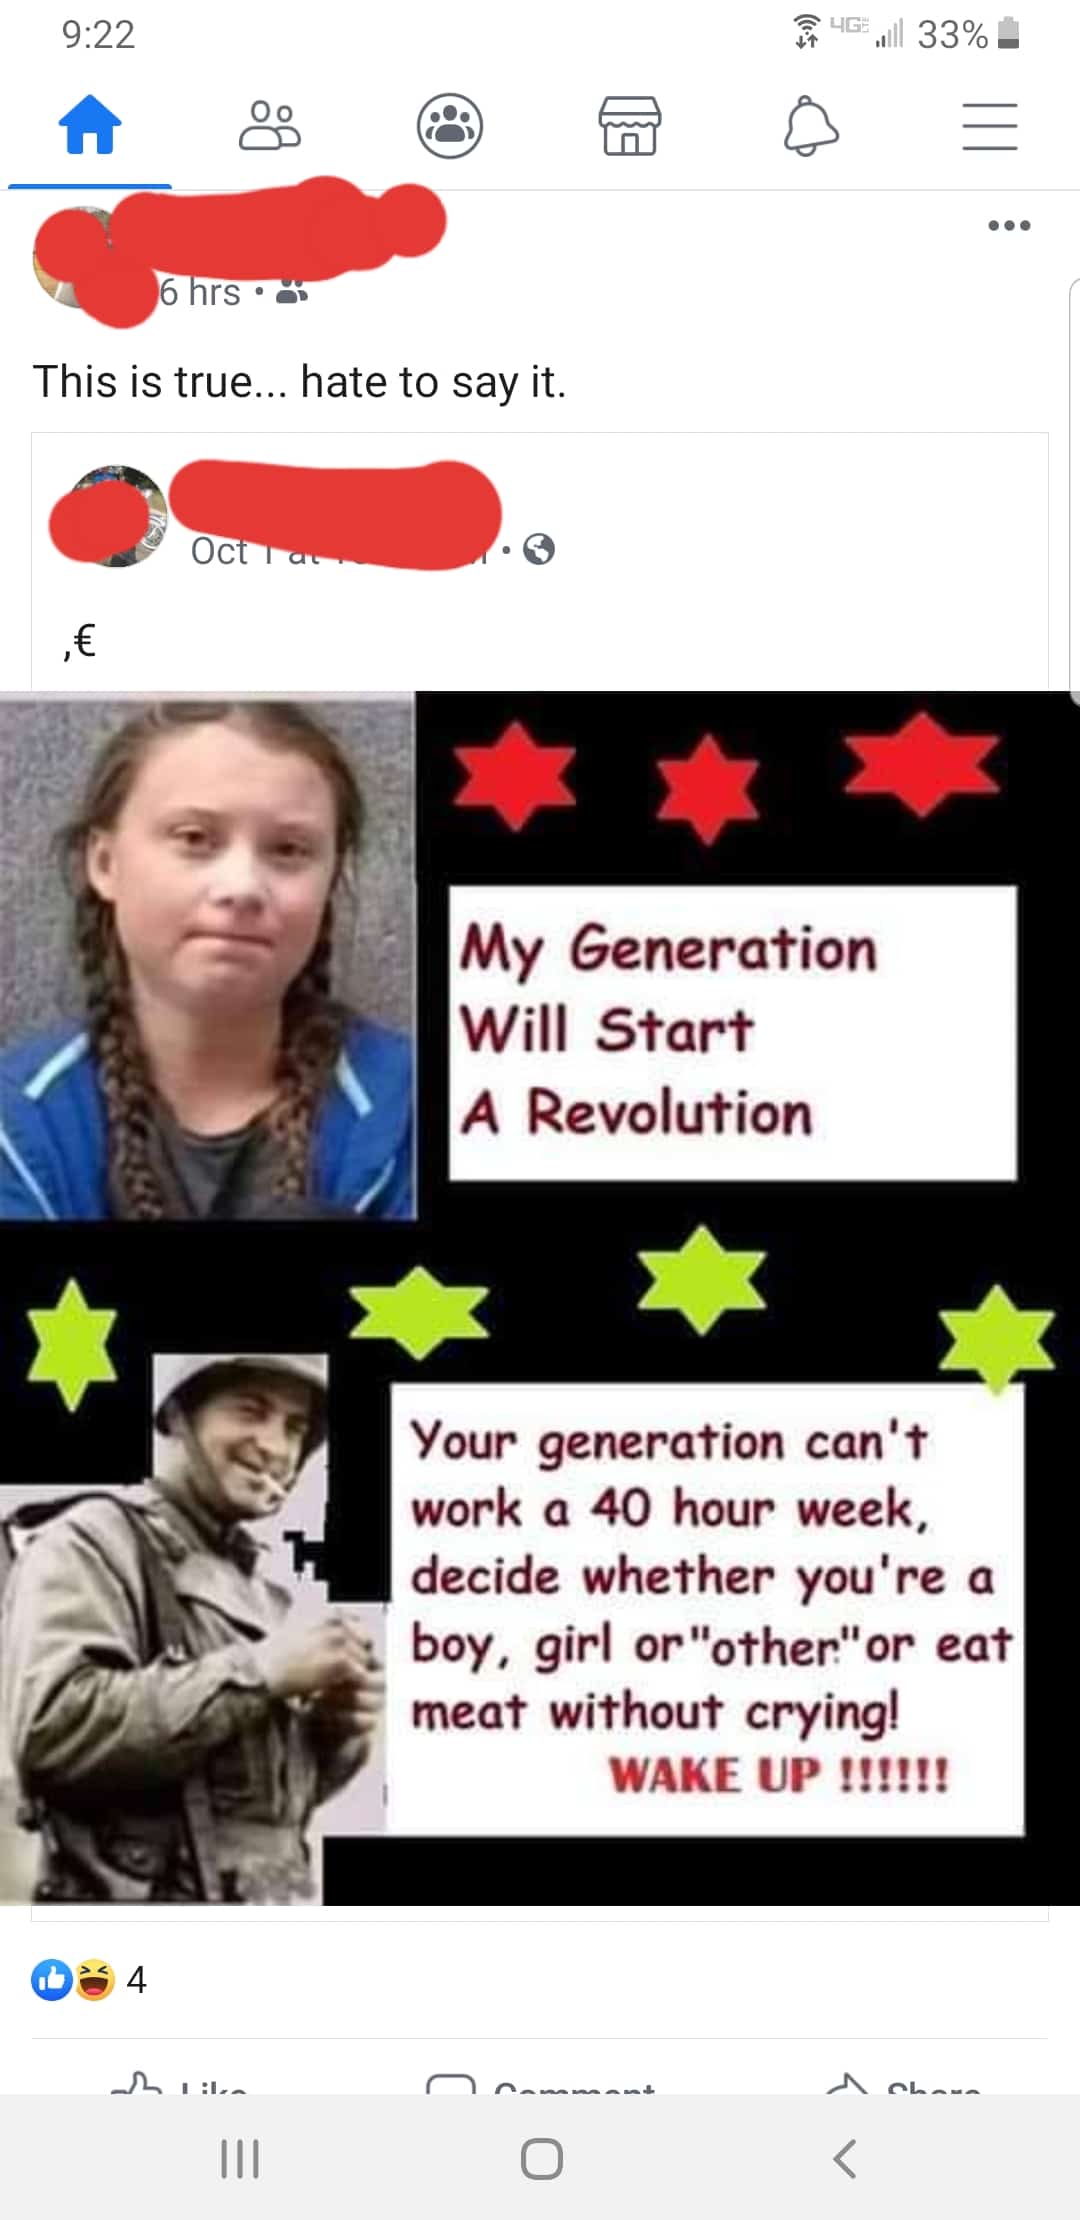 political political-memes political text: 9:22 00 6 rs This is true... hate to say it. G 33% o My Generation Will Start A Revolution Your generation can't work a 40 hour week, decide whether you're a boy, girl eat meat without crying! WAKE UP 